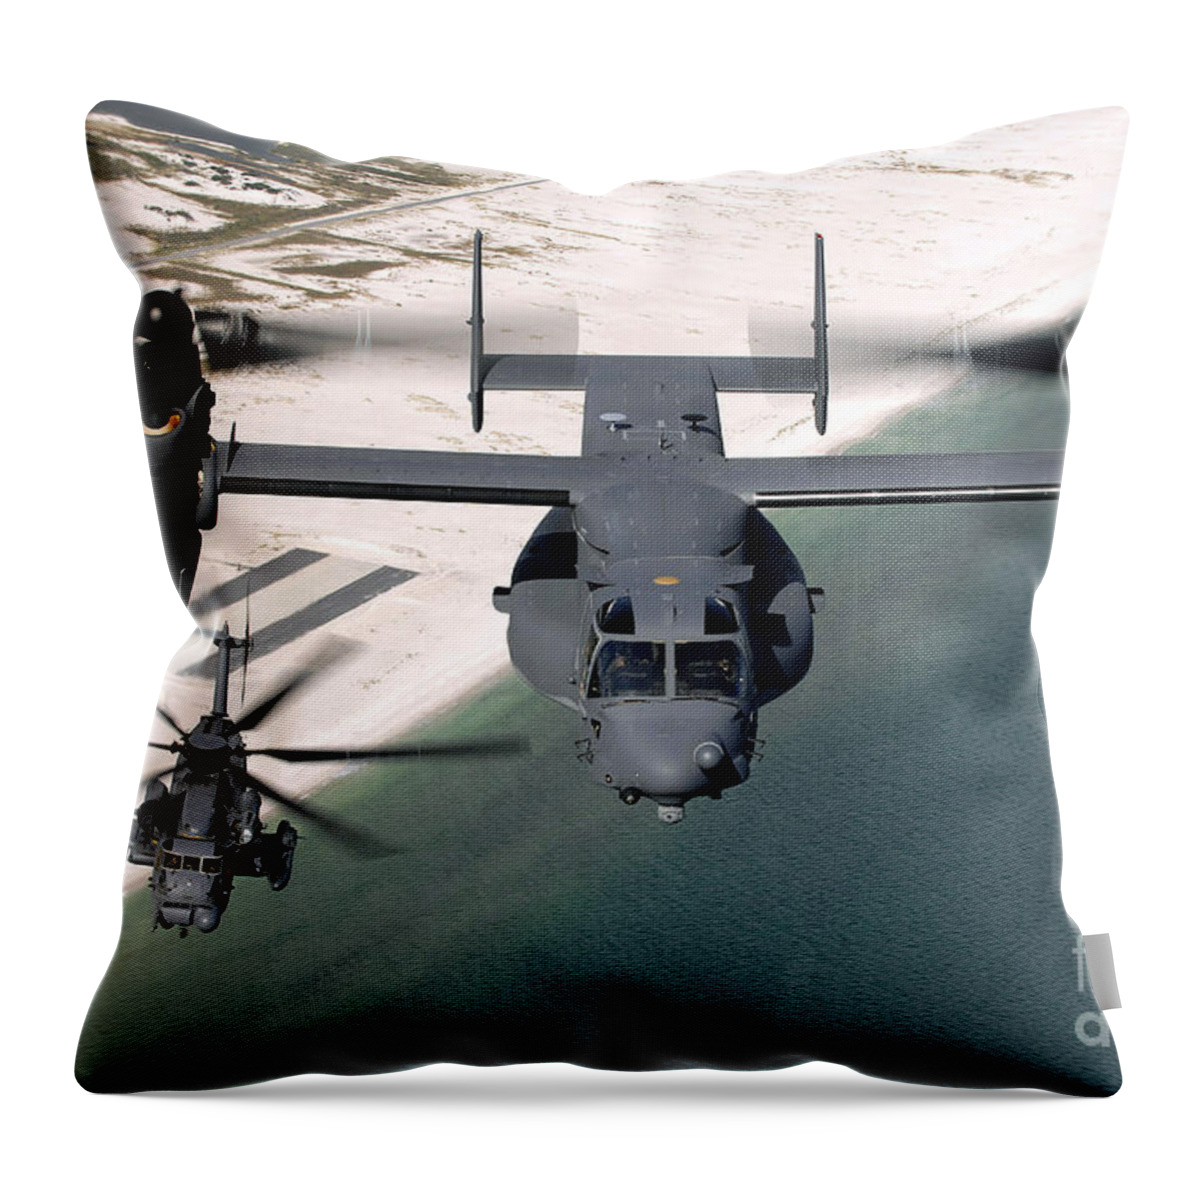 Airborne Throw Pillow featuring the photograph A Cv-22 Osprey And An Mh-53 Pave Low by Stocktrek Images